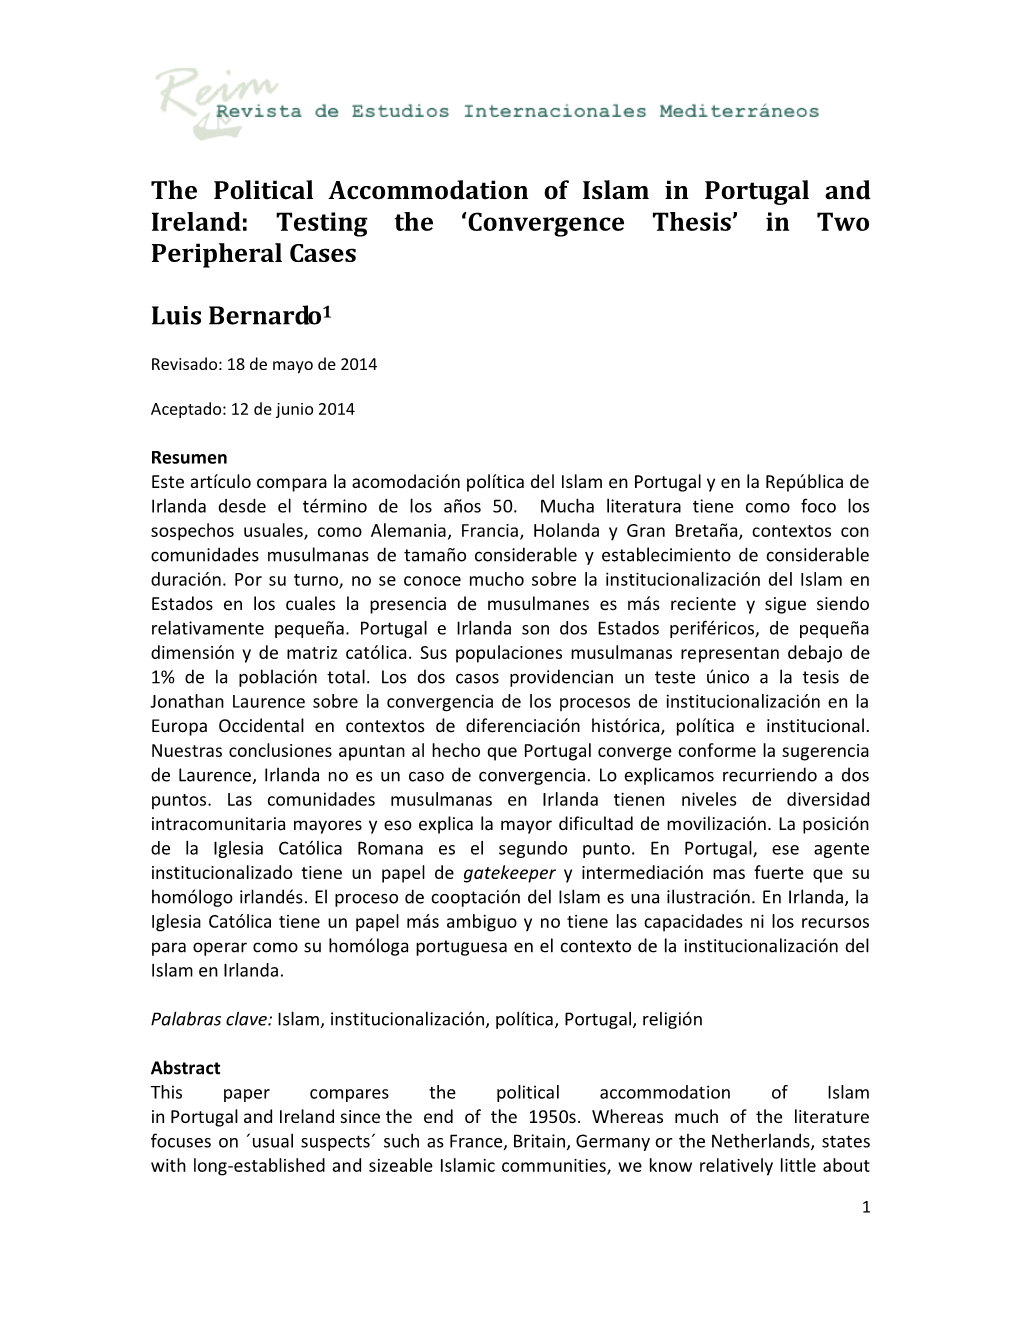 The Political Accommodation of Islam in Portugal and Ireland: Testing the ‘Convergence Thesis’ in Two Peripheral Cases